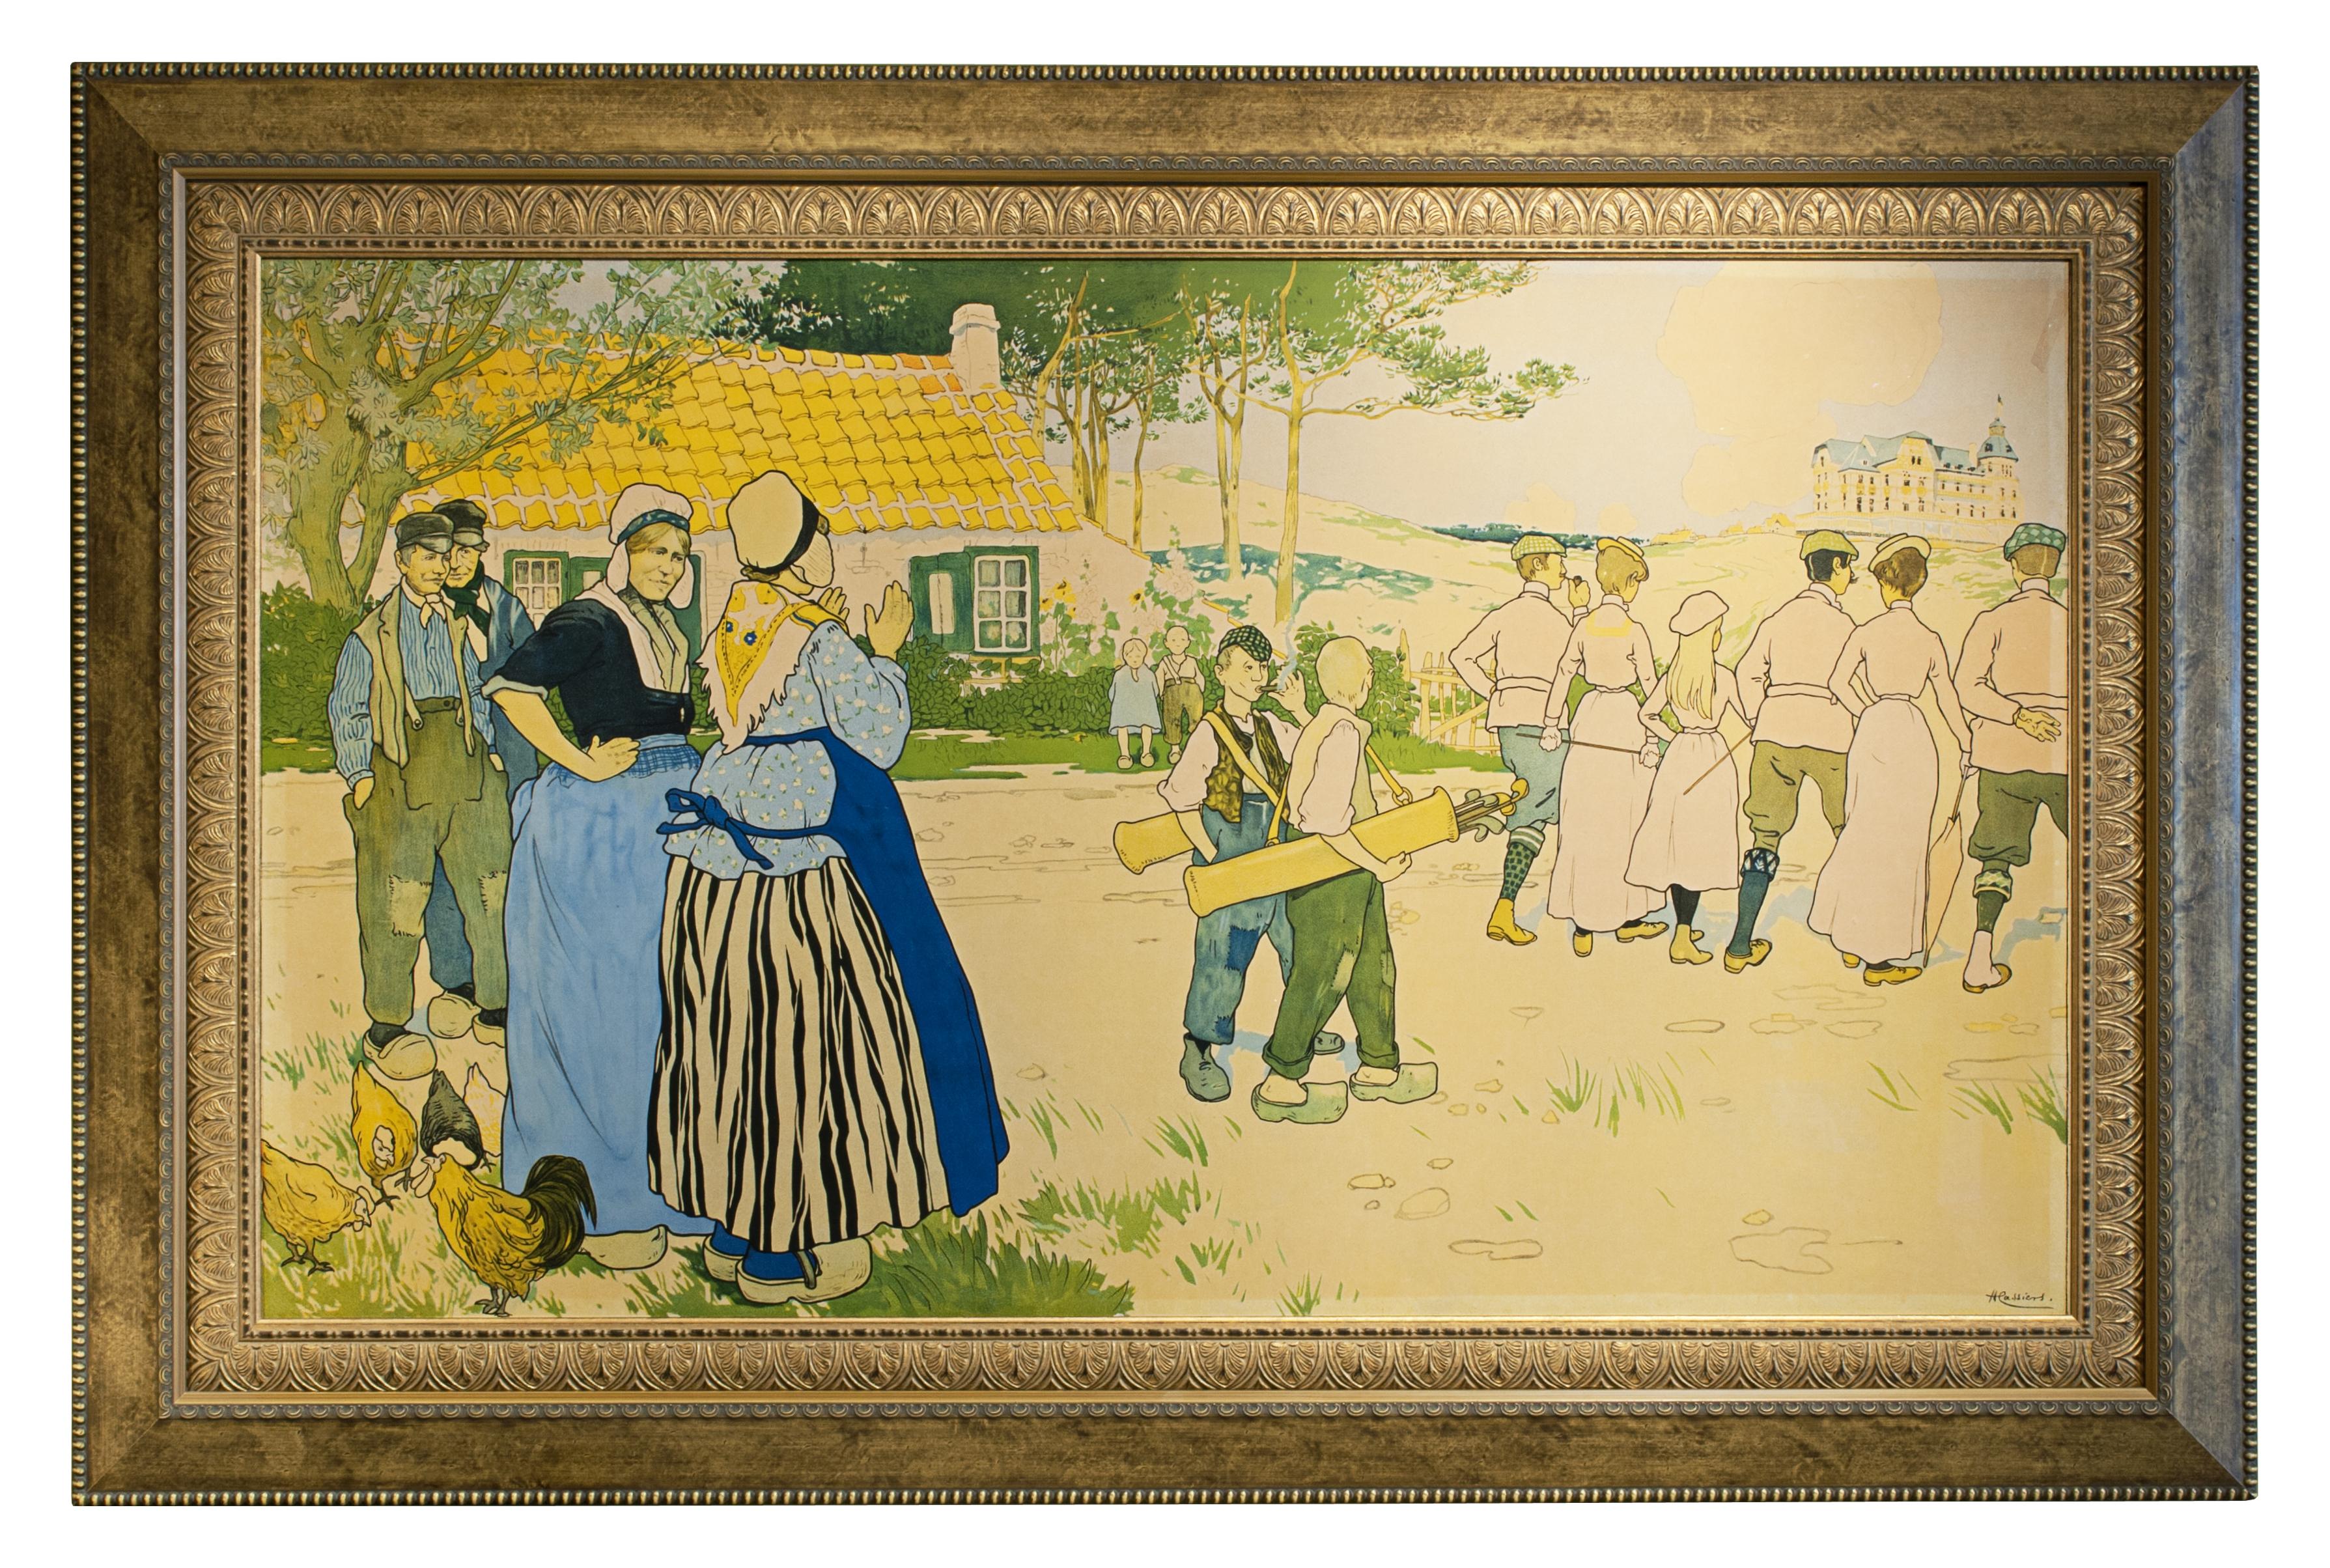 Antique golf poster.
A large continental advertising poster for Coq sur Mer, De Haan, Belgium, 1897. The image is in a faded condition, but this is an extremely impressive picture. The picture depicts a group of golfers off to play golf with their